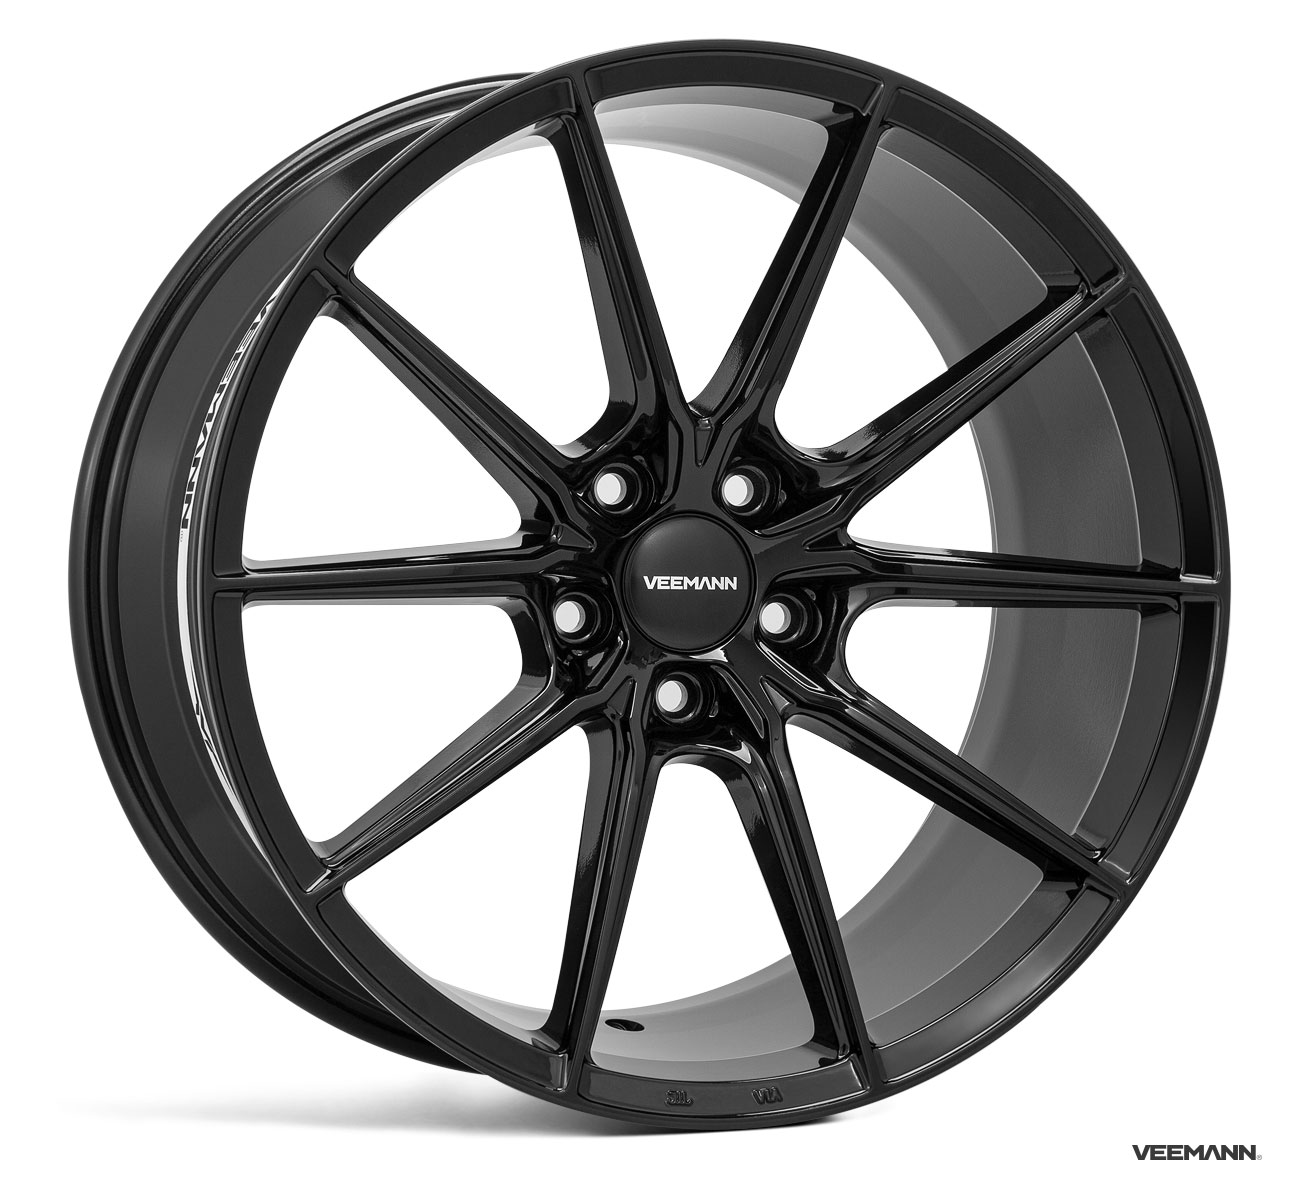 NEW 19" VEEMANN V-FS48 ALLOY WHEELS IN GLOSS BLACK WITH WIDER 9.5" REARS 5X112